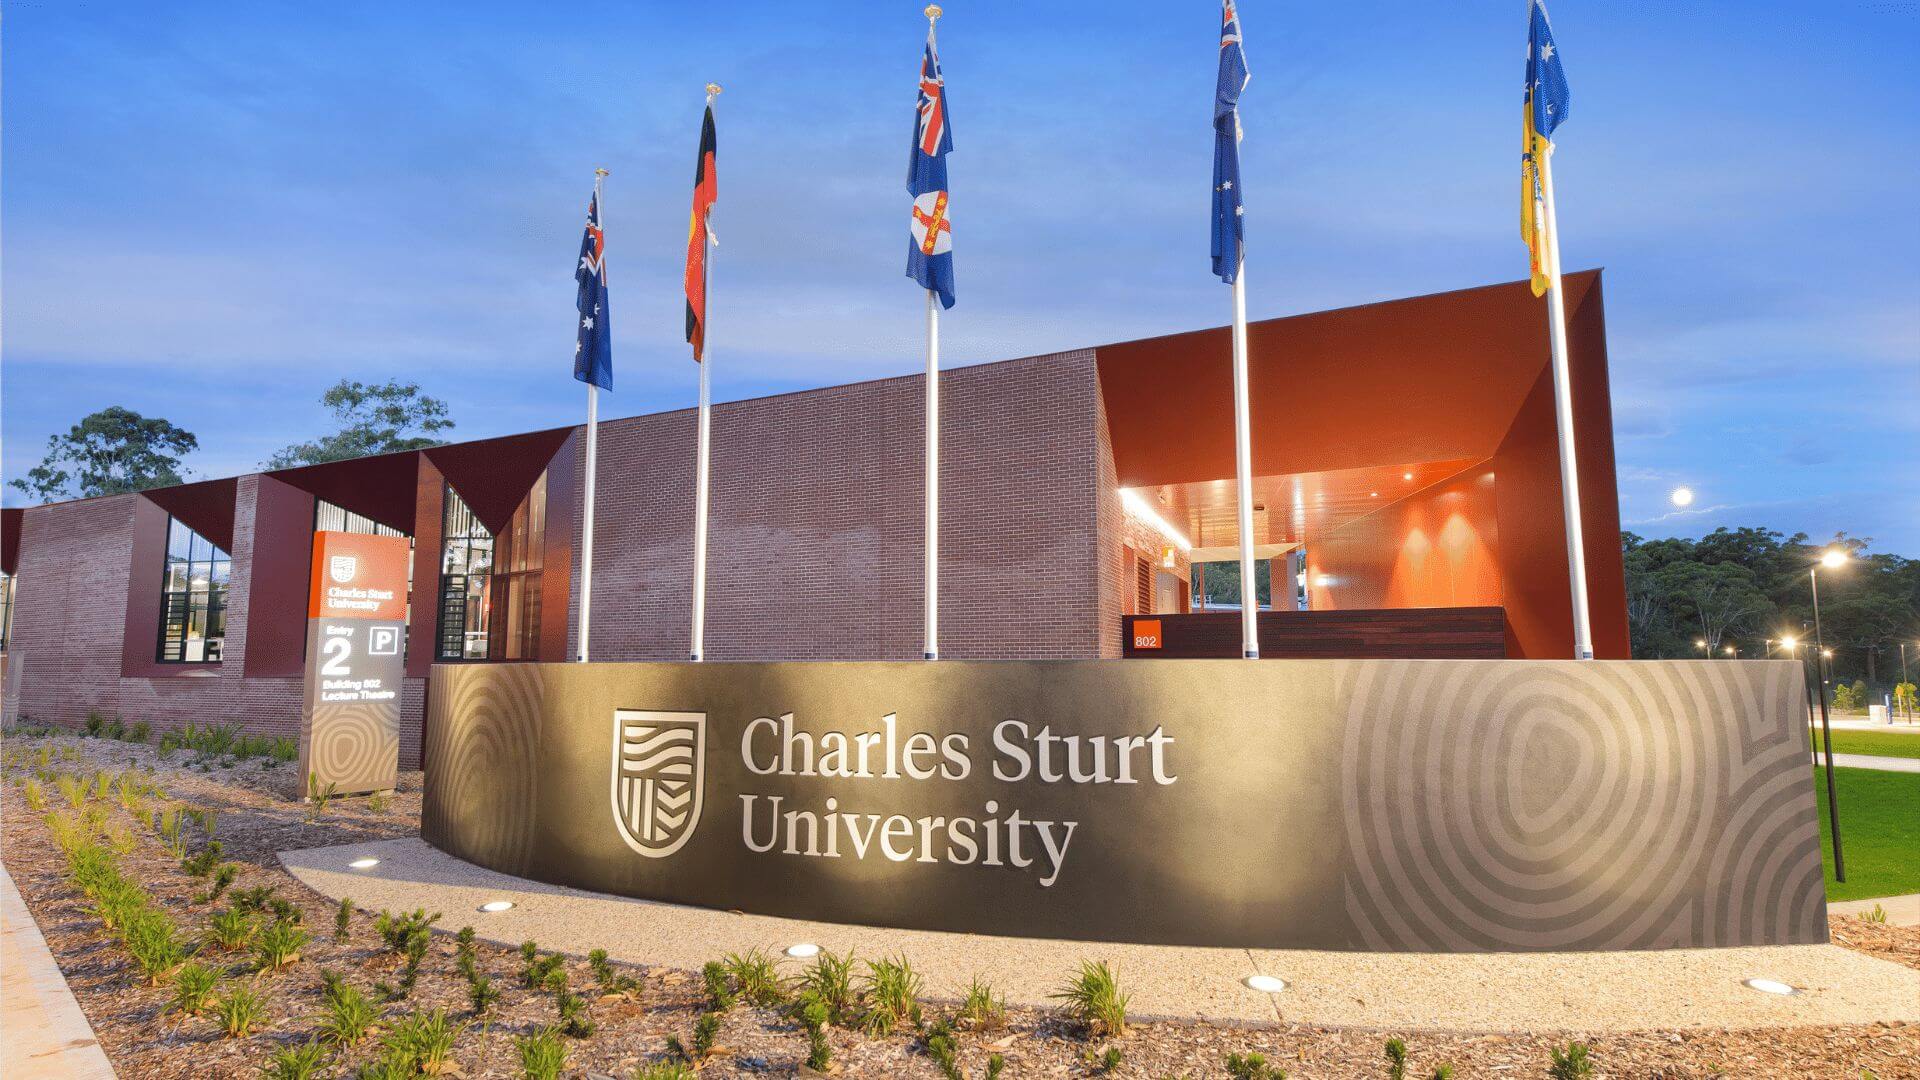 D2L – Charles Sturt University selects D2L Brightspace to further support its evolving learning environment